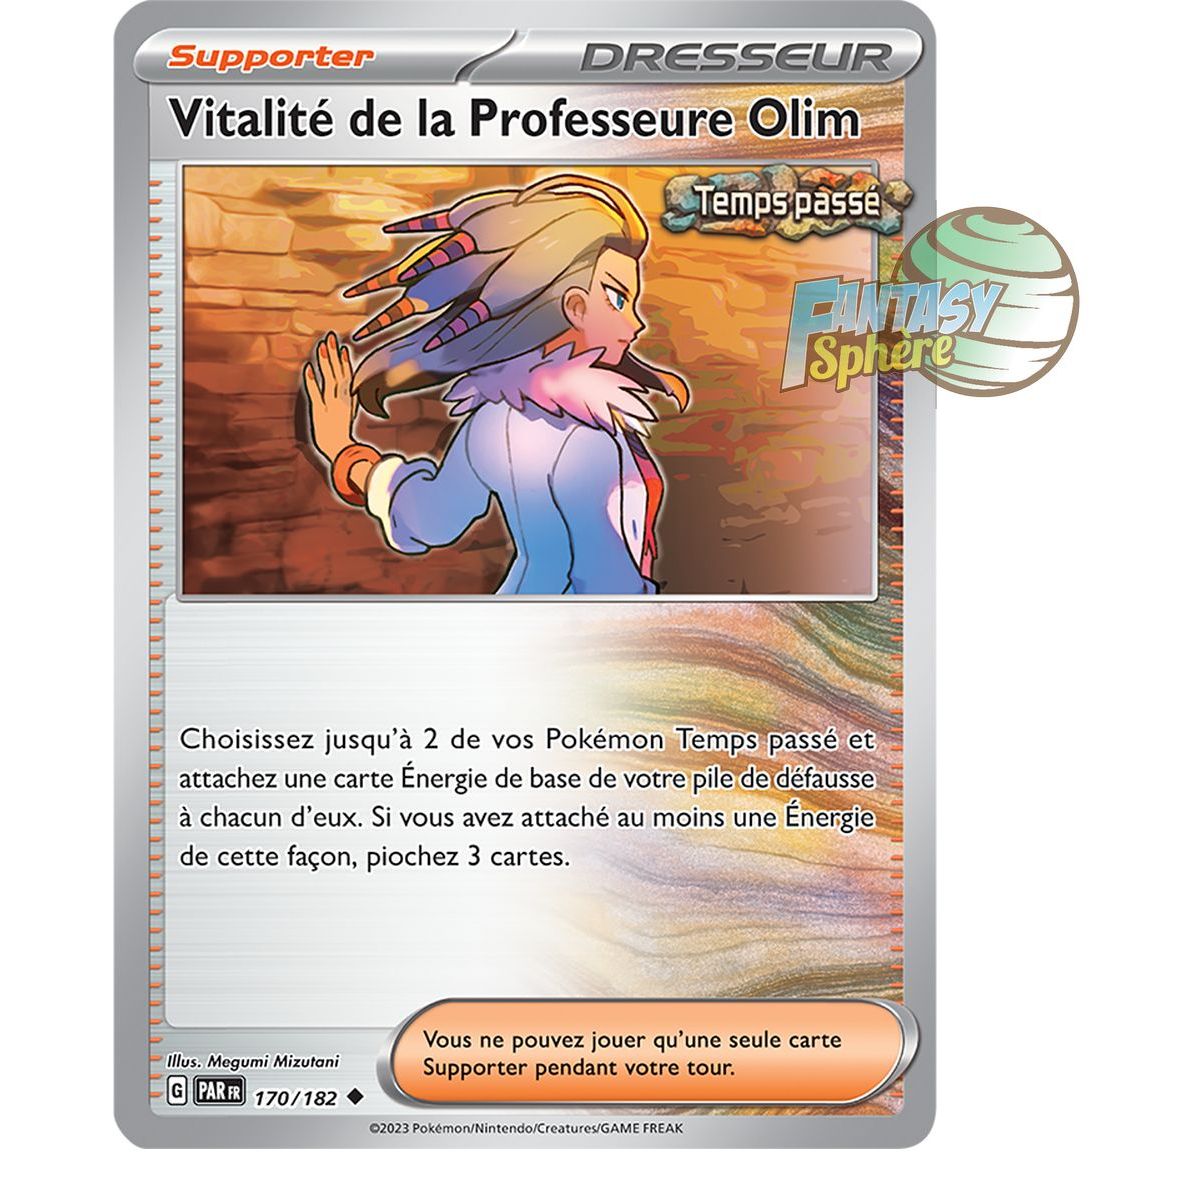 Vitality of Professor Olim - Uncommon 170/182 - Scarlet and Violet Paradox Rift